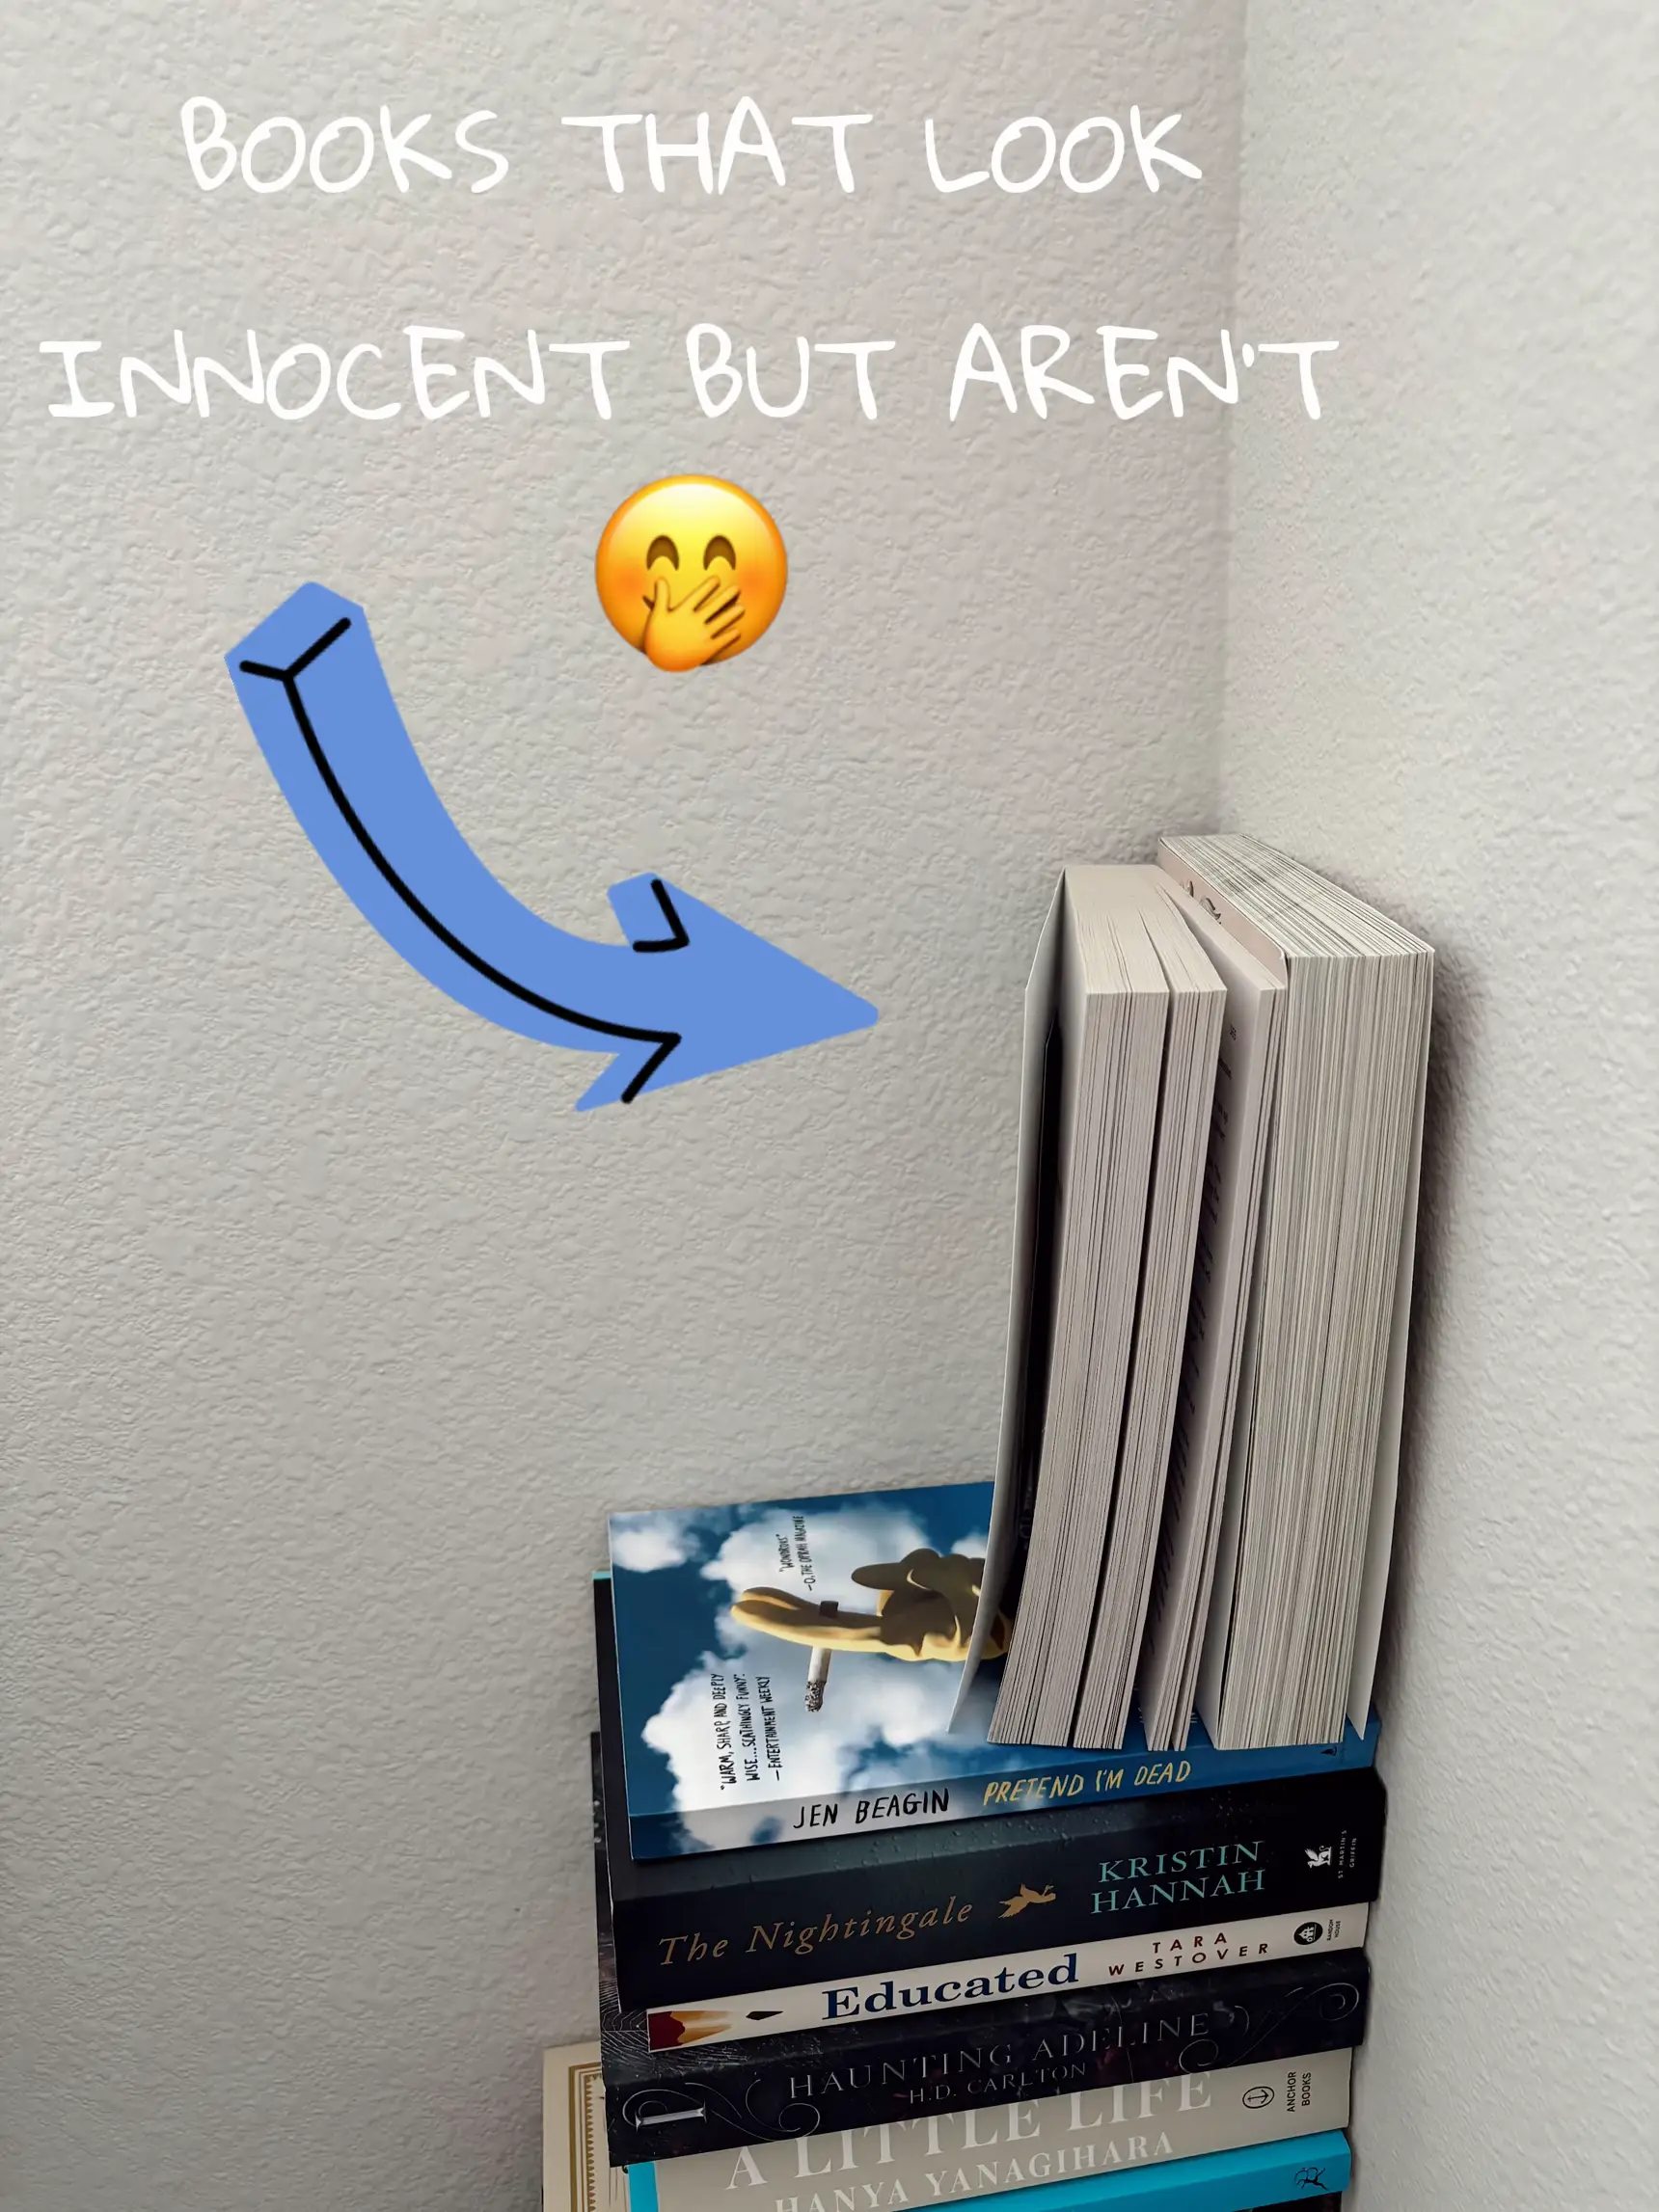 BOOKS THAT LOOK INNOCENT BUT AREN’T 🔥's images